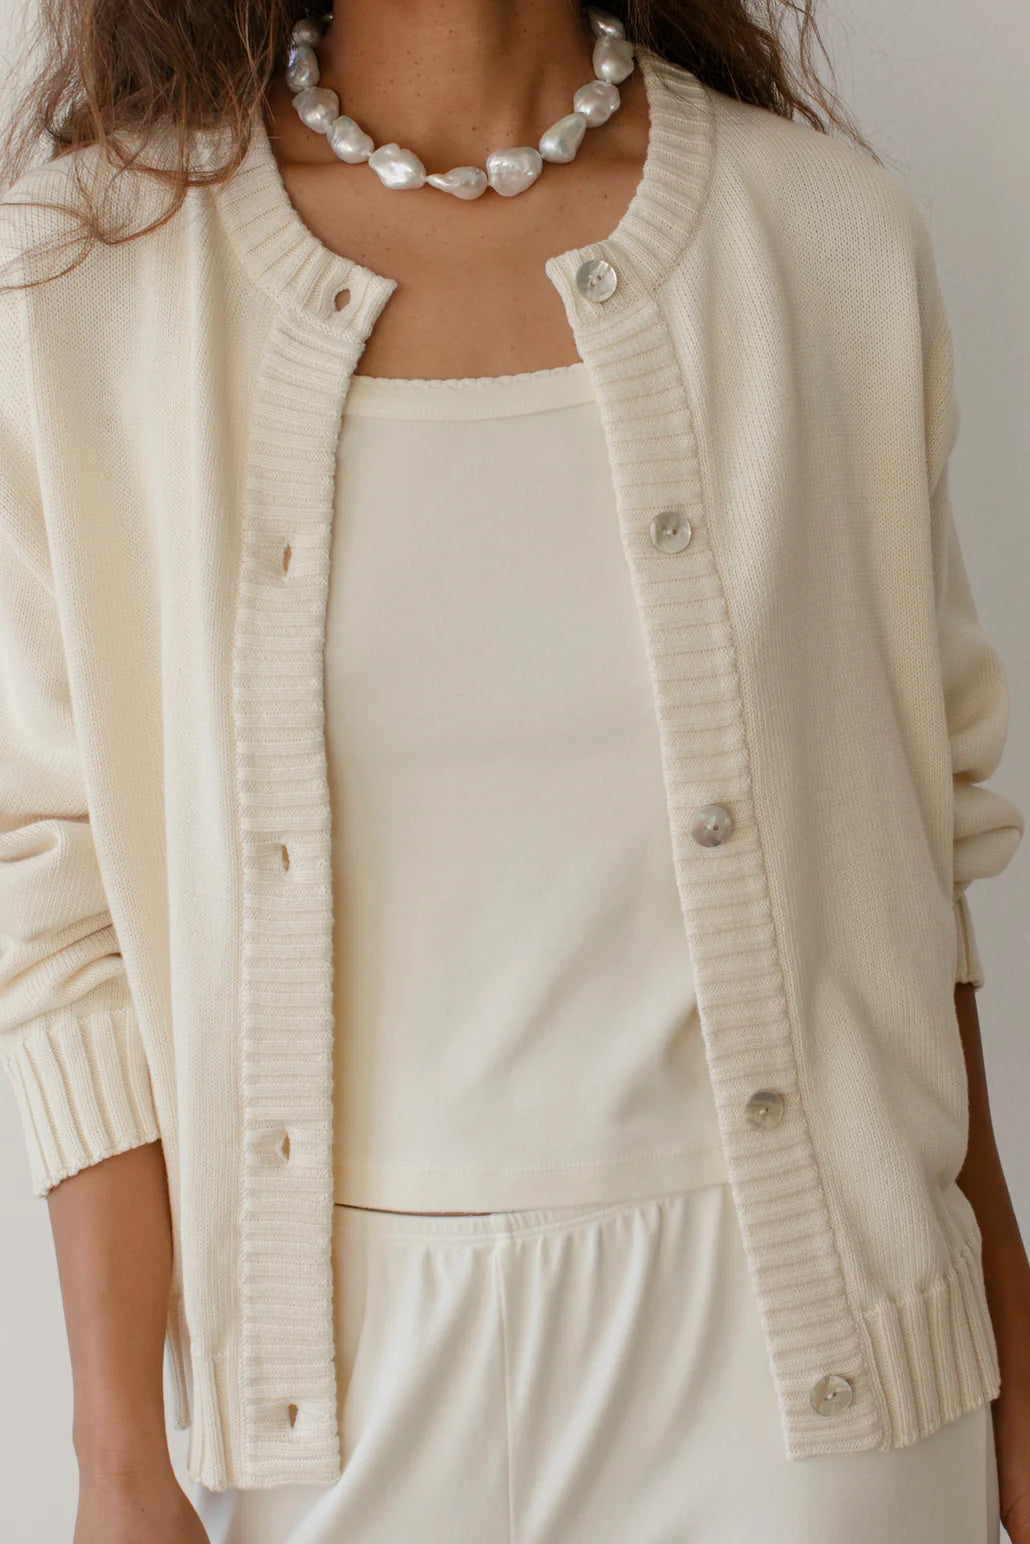 DONNI. The Cotton Knit Cardigan